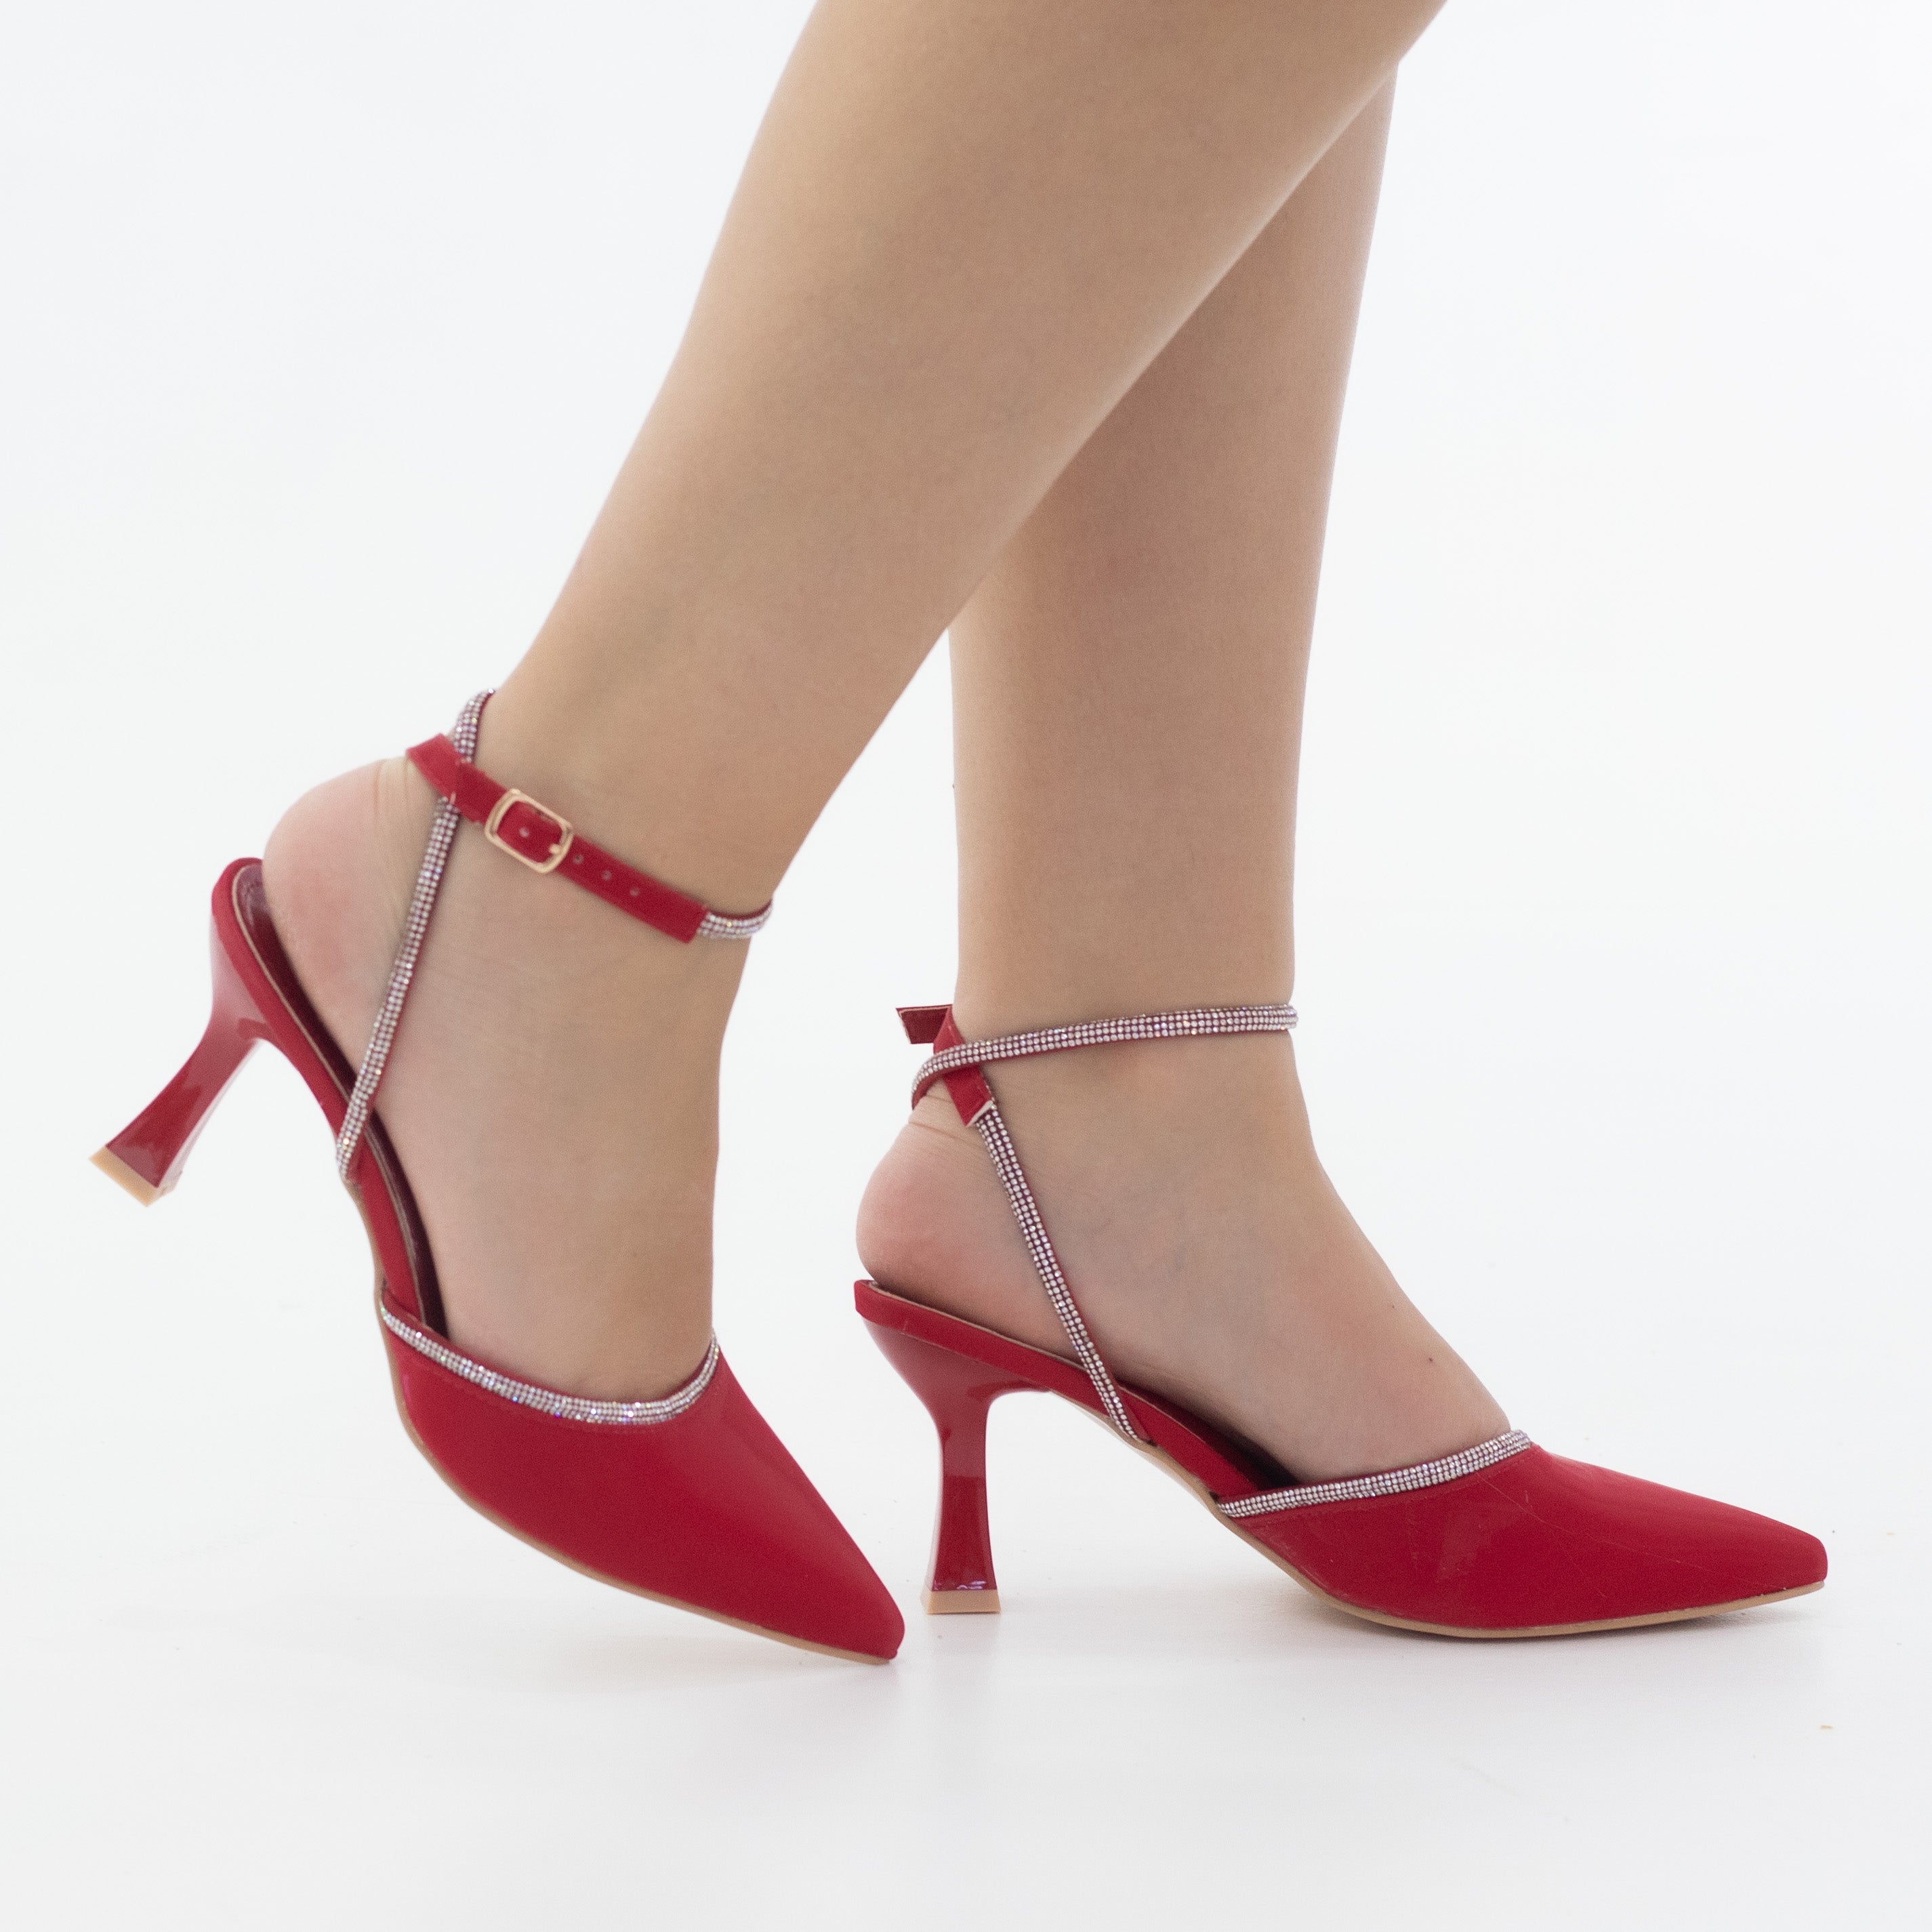 Hamisha embellished with diamante detailed on spool heel red